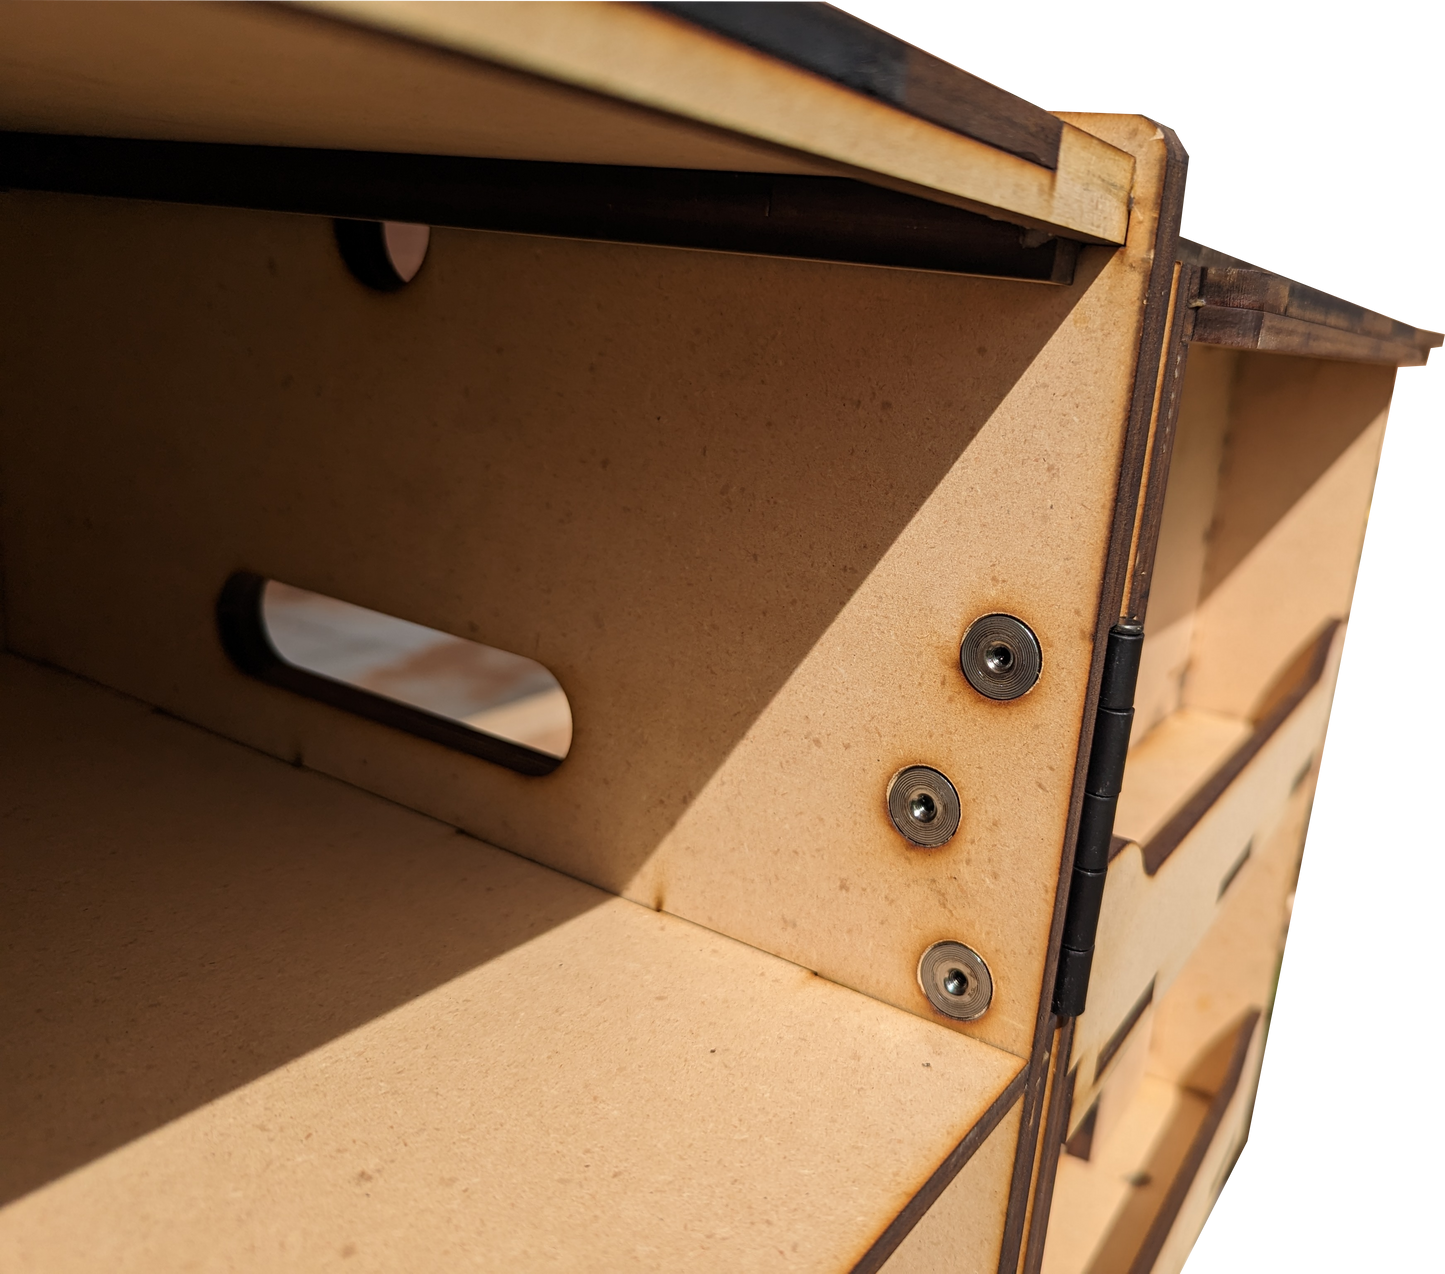 Chuck Box Camping Kitchen by Anser